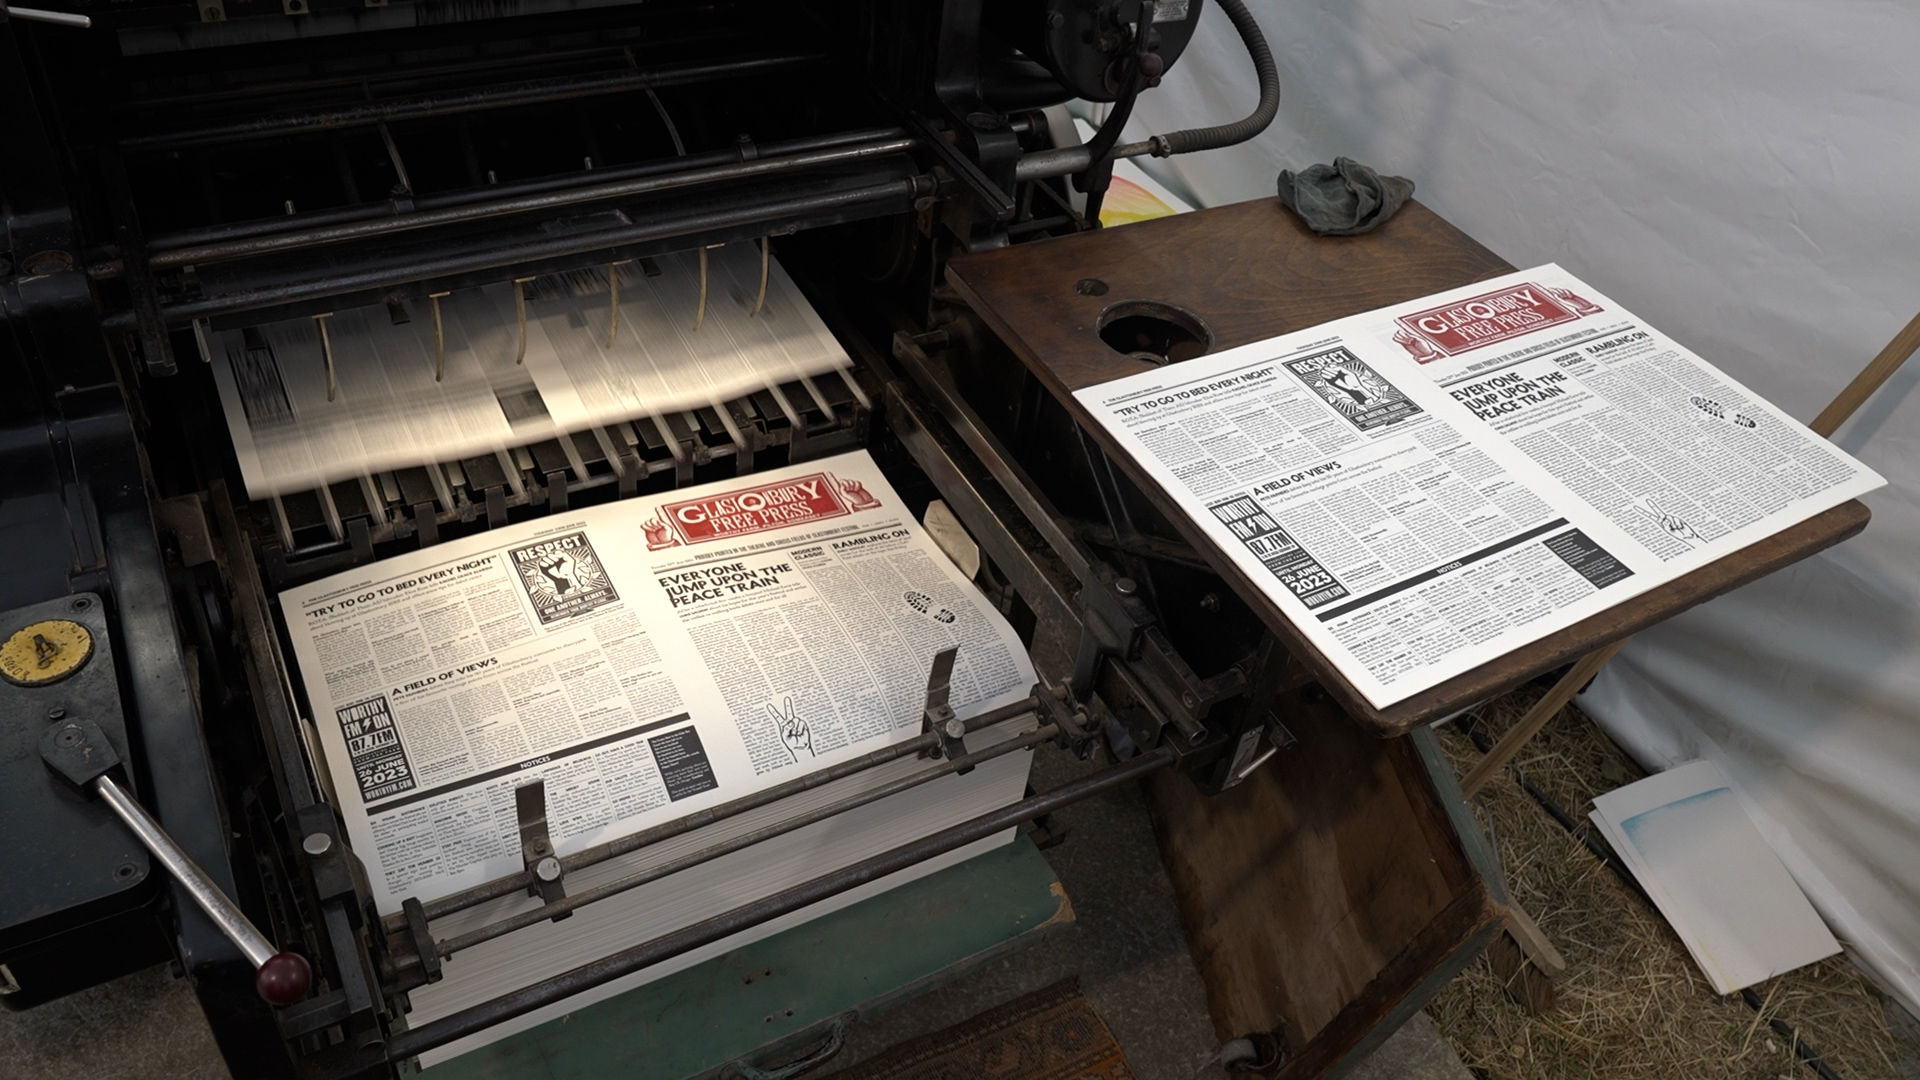 Glastonbury's resident newspaper during printing at the festival 